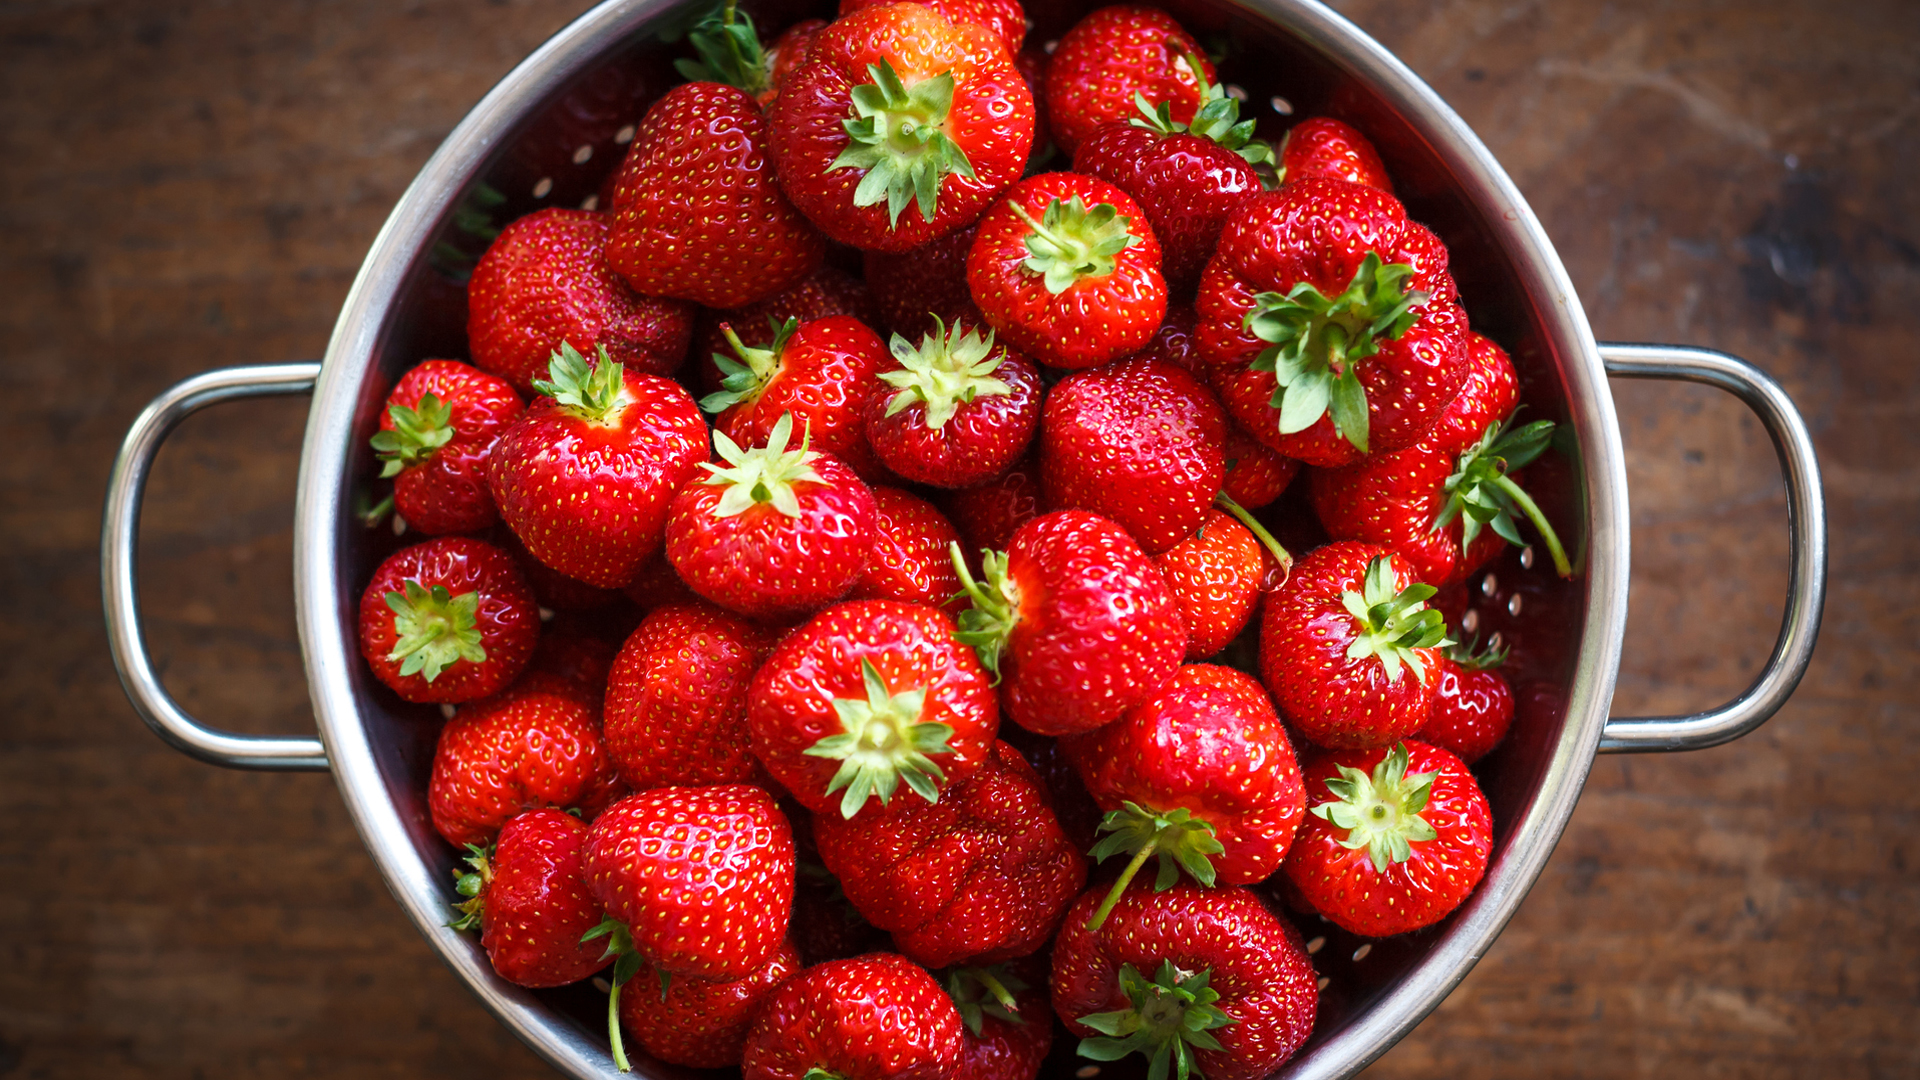 strawberries are a good low-sugar fruit